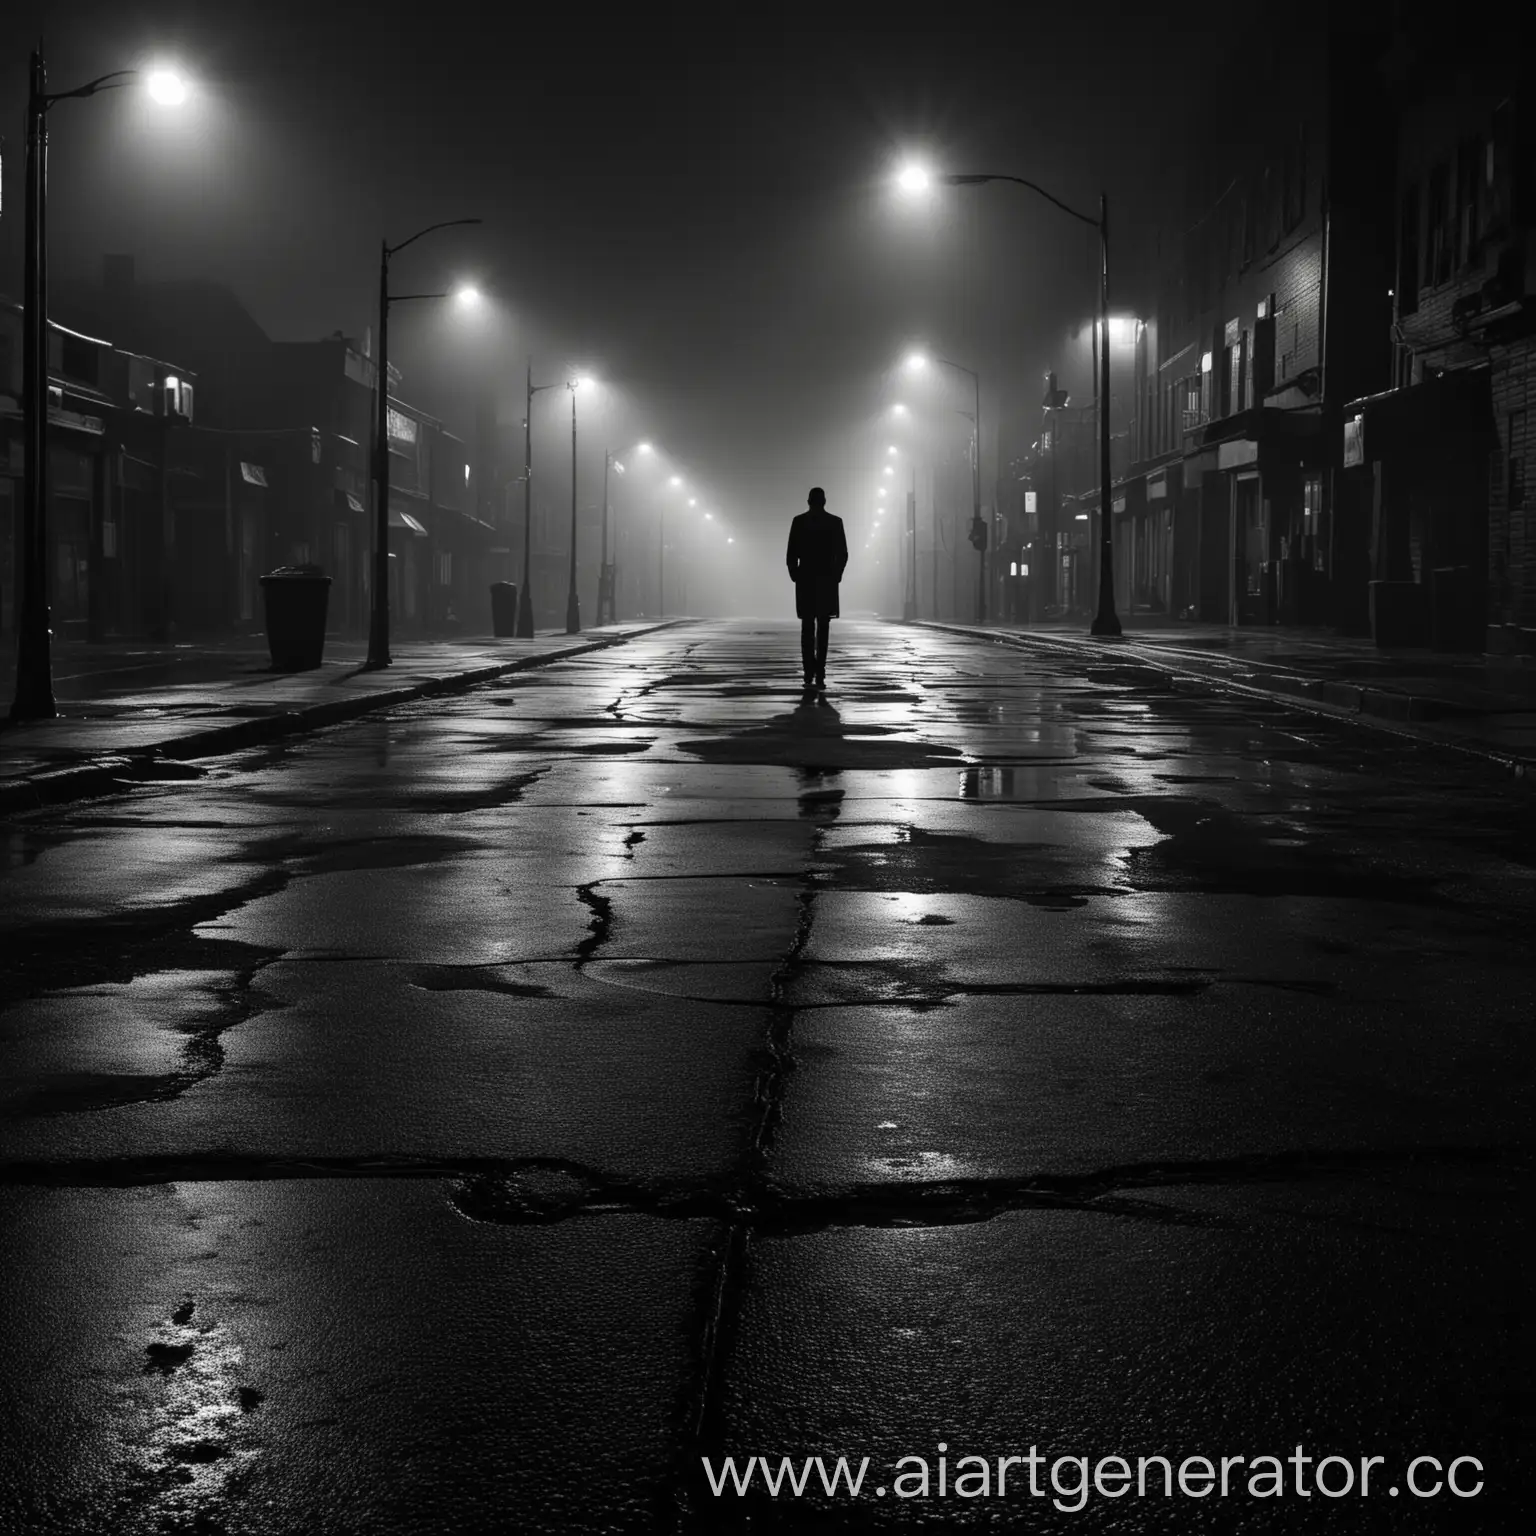 Against the backdrop of the urban landscape, the silhouette of a lone figure looms, gazing into the distance as if contemplating the meaning of the laws that govern our world. The glow of streetlights reflects off the wet asphalt, adding an atmosphere of mystery and incomprehension to this scene.